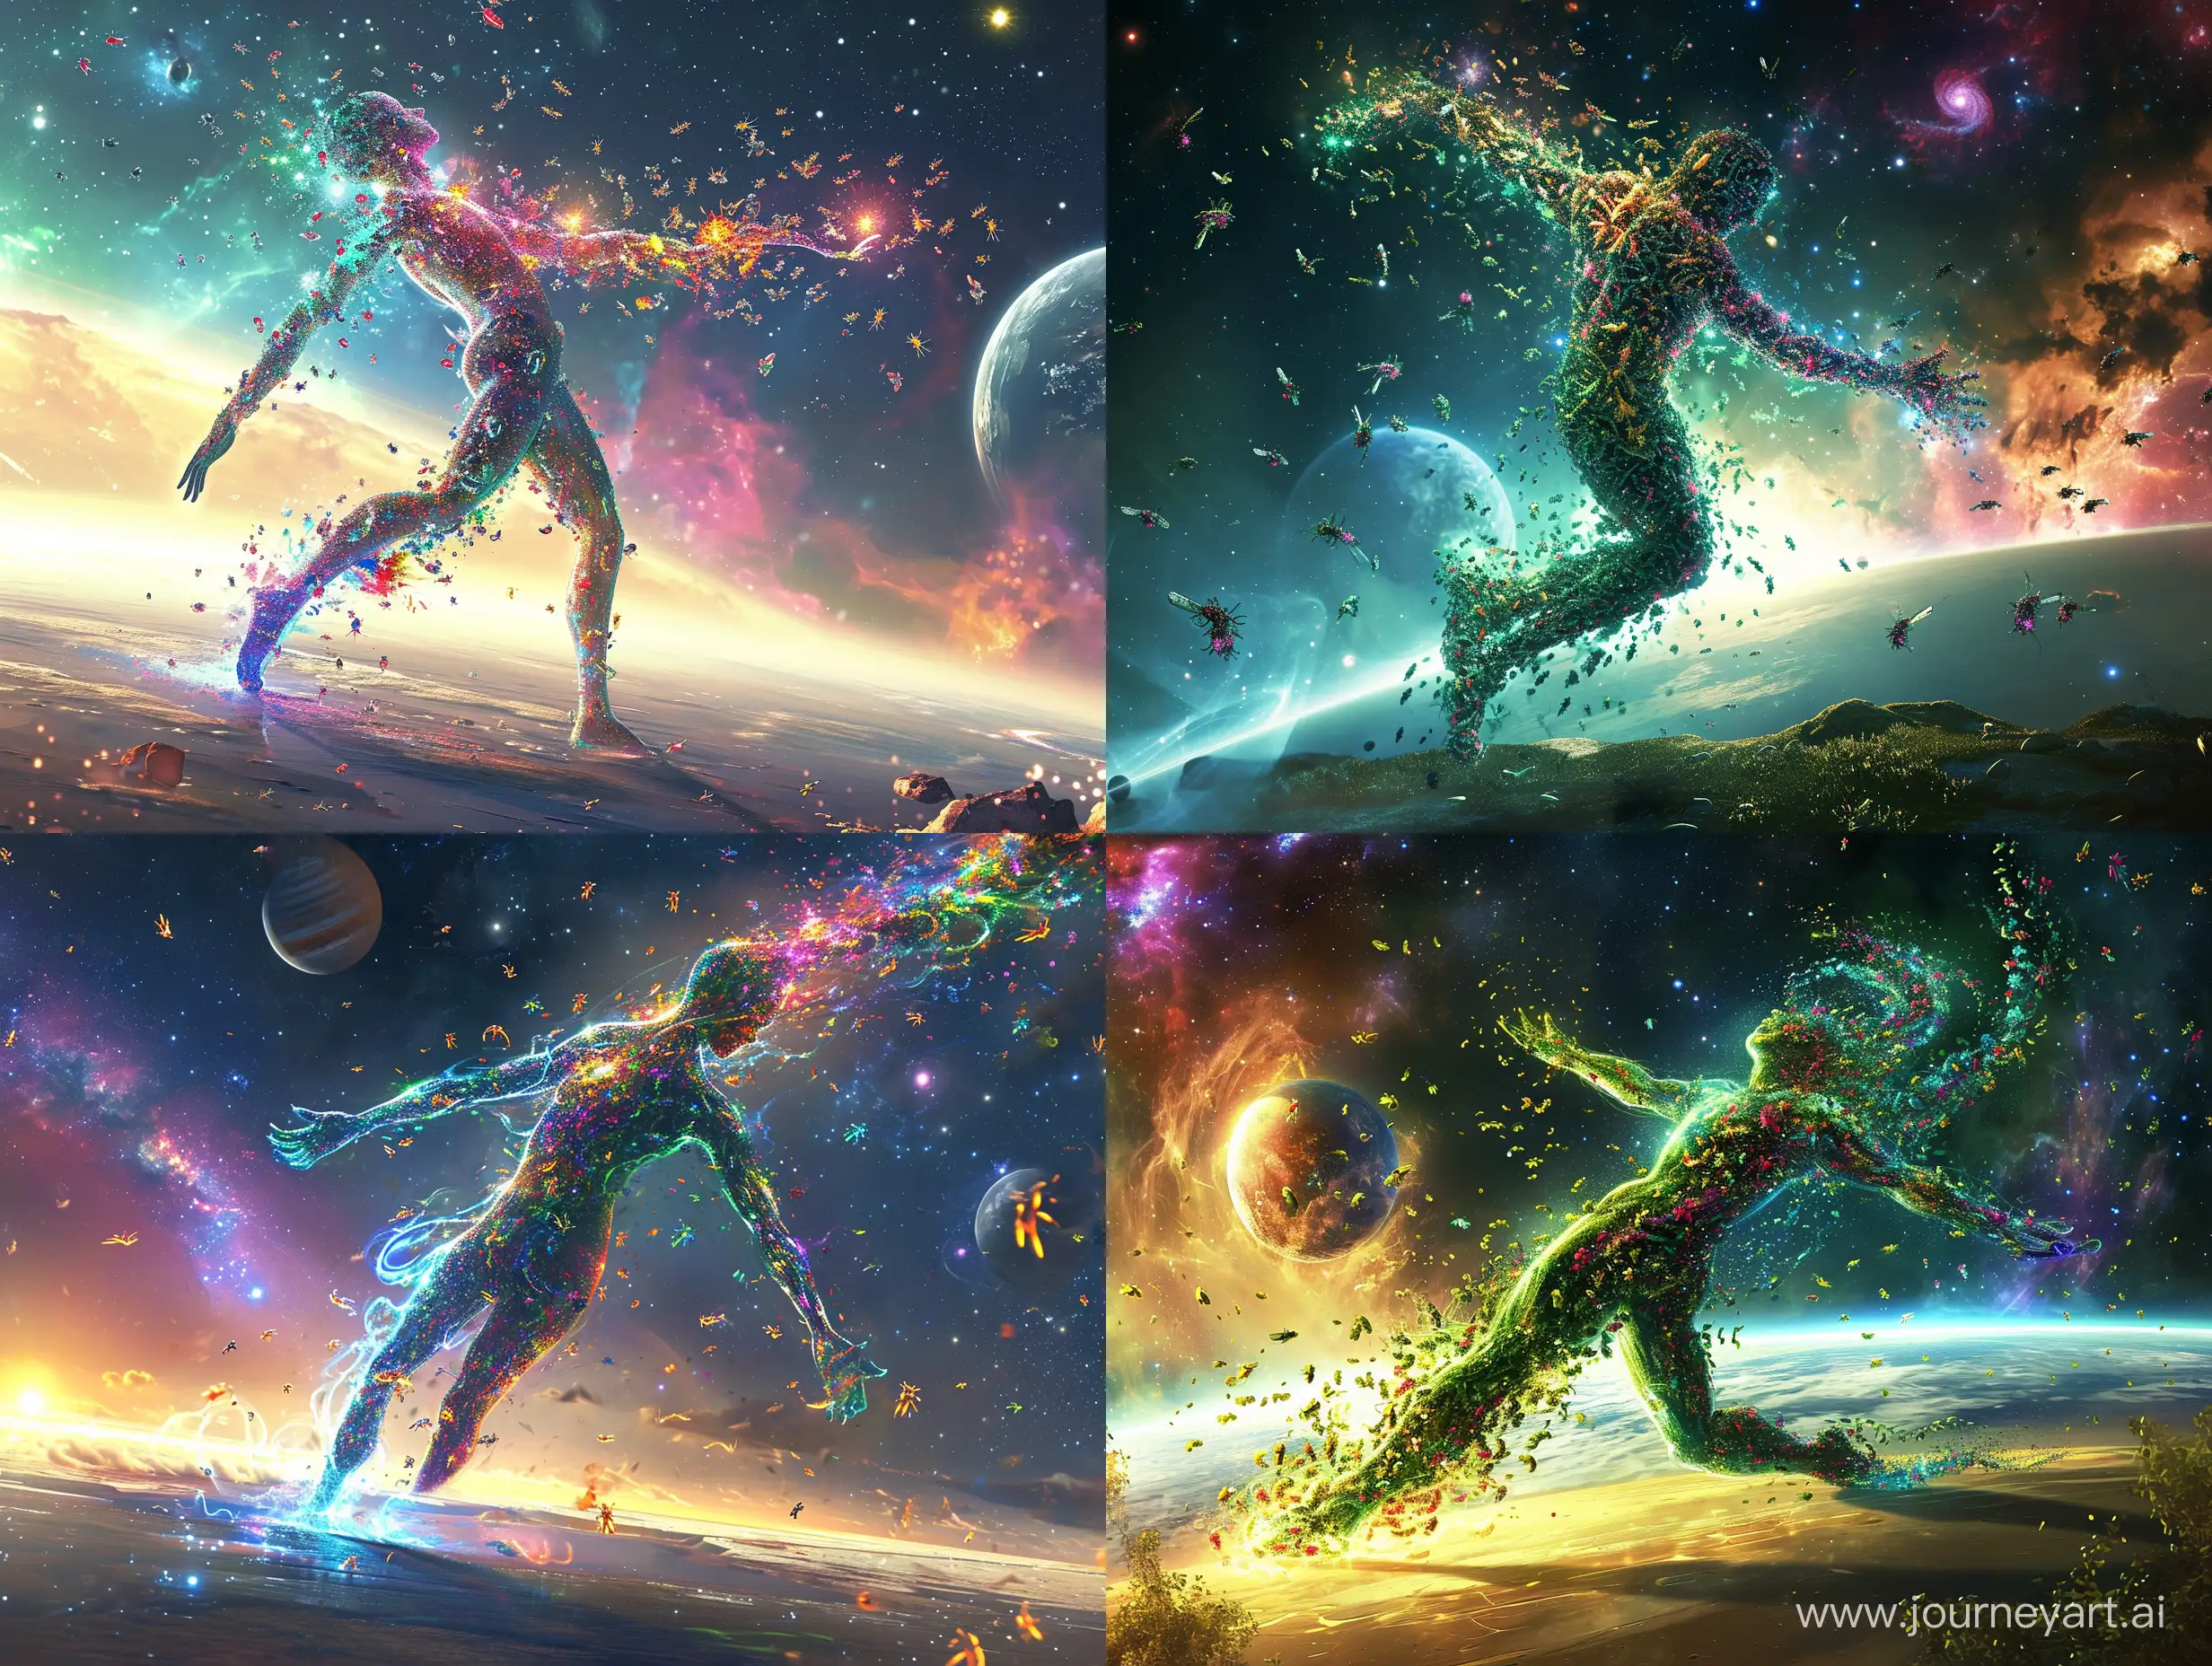 Subject: Human body shape created by flying glowing bugs levitating close to ground and wide open arms

Location: Surreal planet with magical surroundings and planet and galaxies in background
Style:  Mystical
Colors: very vivid color palette
